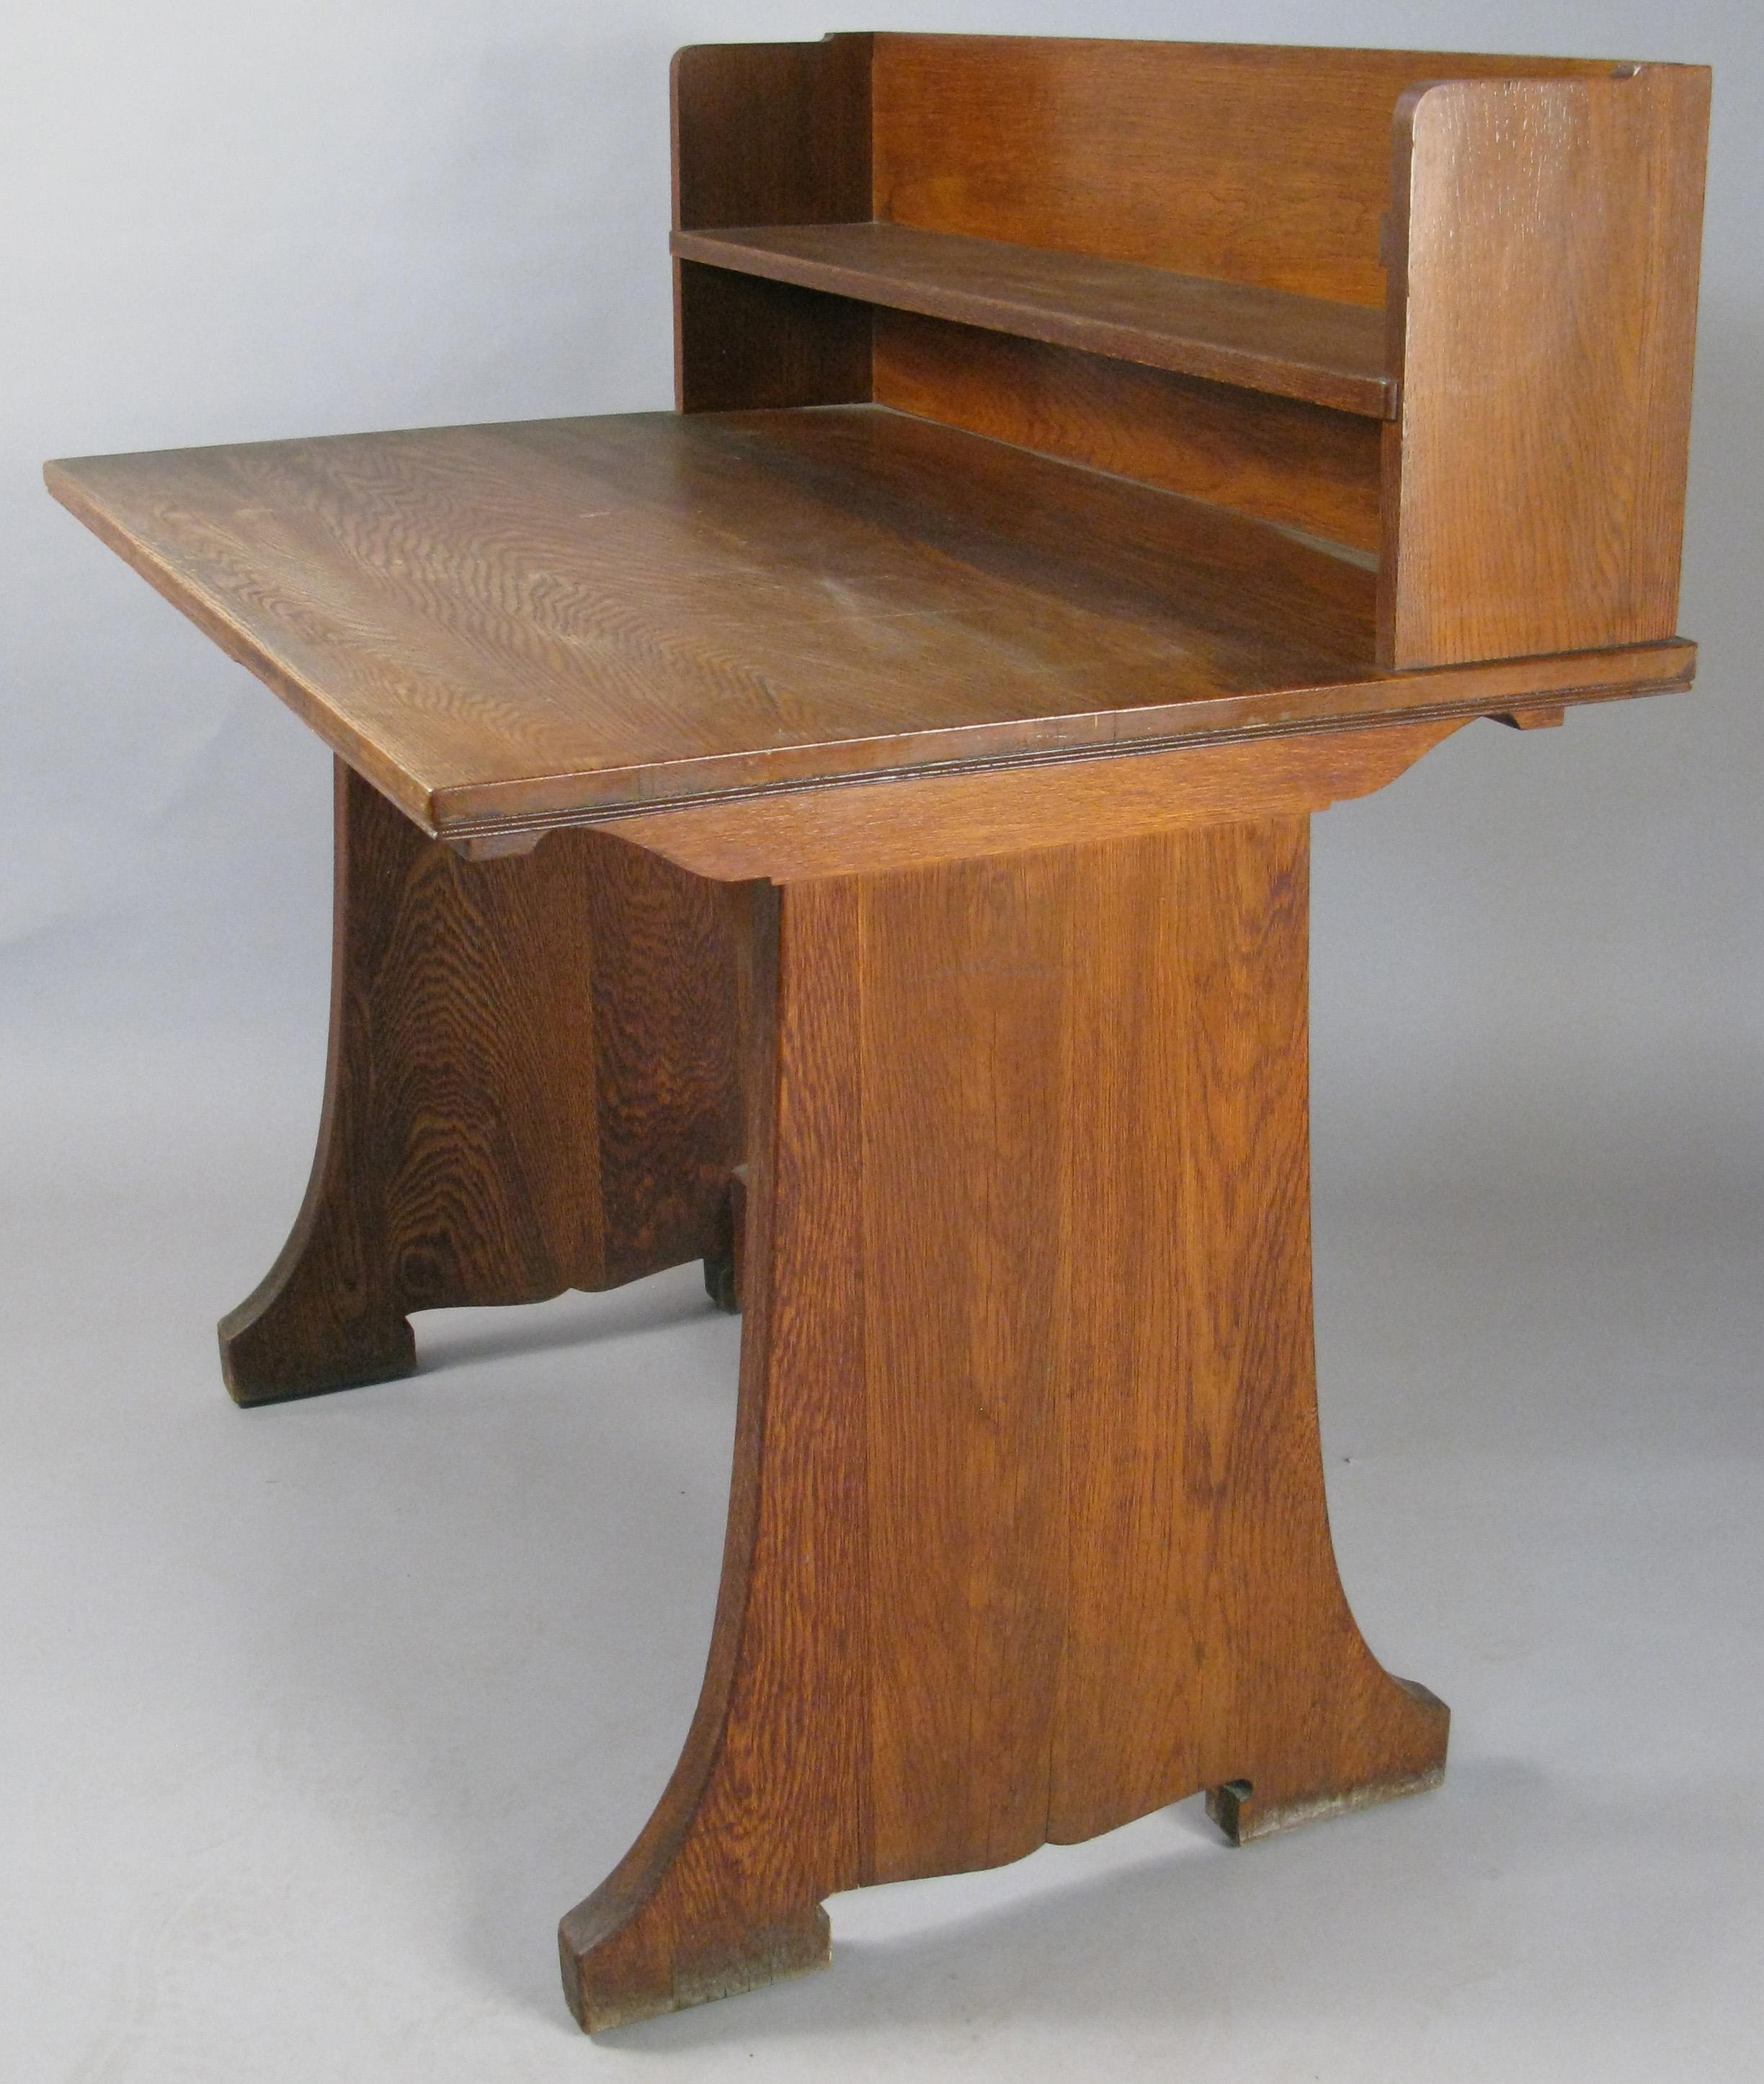 A very handsome antique oak writing desk originally from the Harvard Divinity School. With privacy riser in the back, and a slim shelf. Beautiful design and very well made. In good overall condition.

We have a pair of these desks, priced